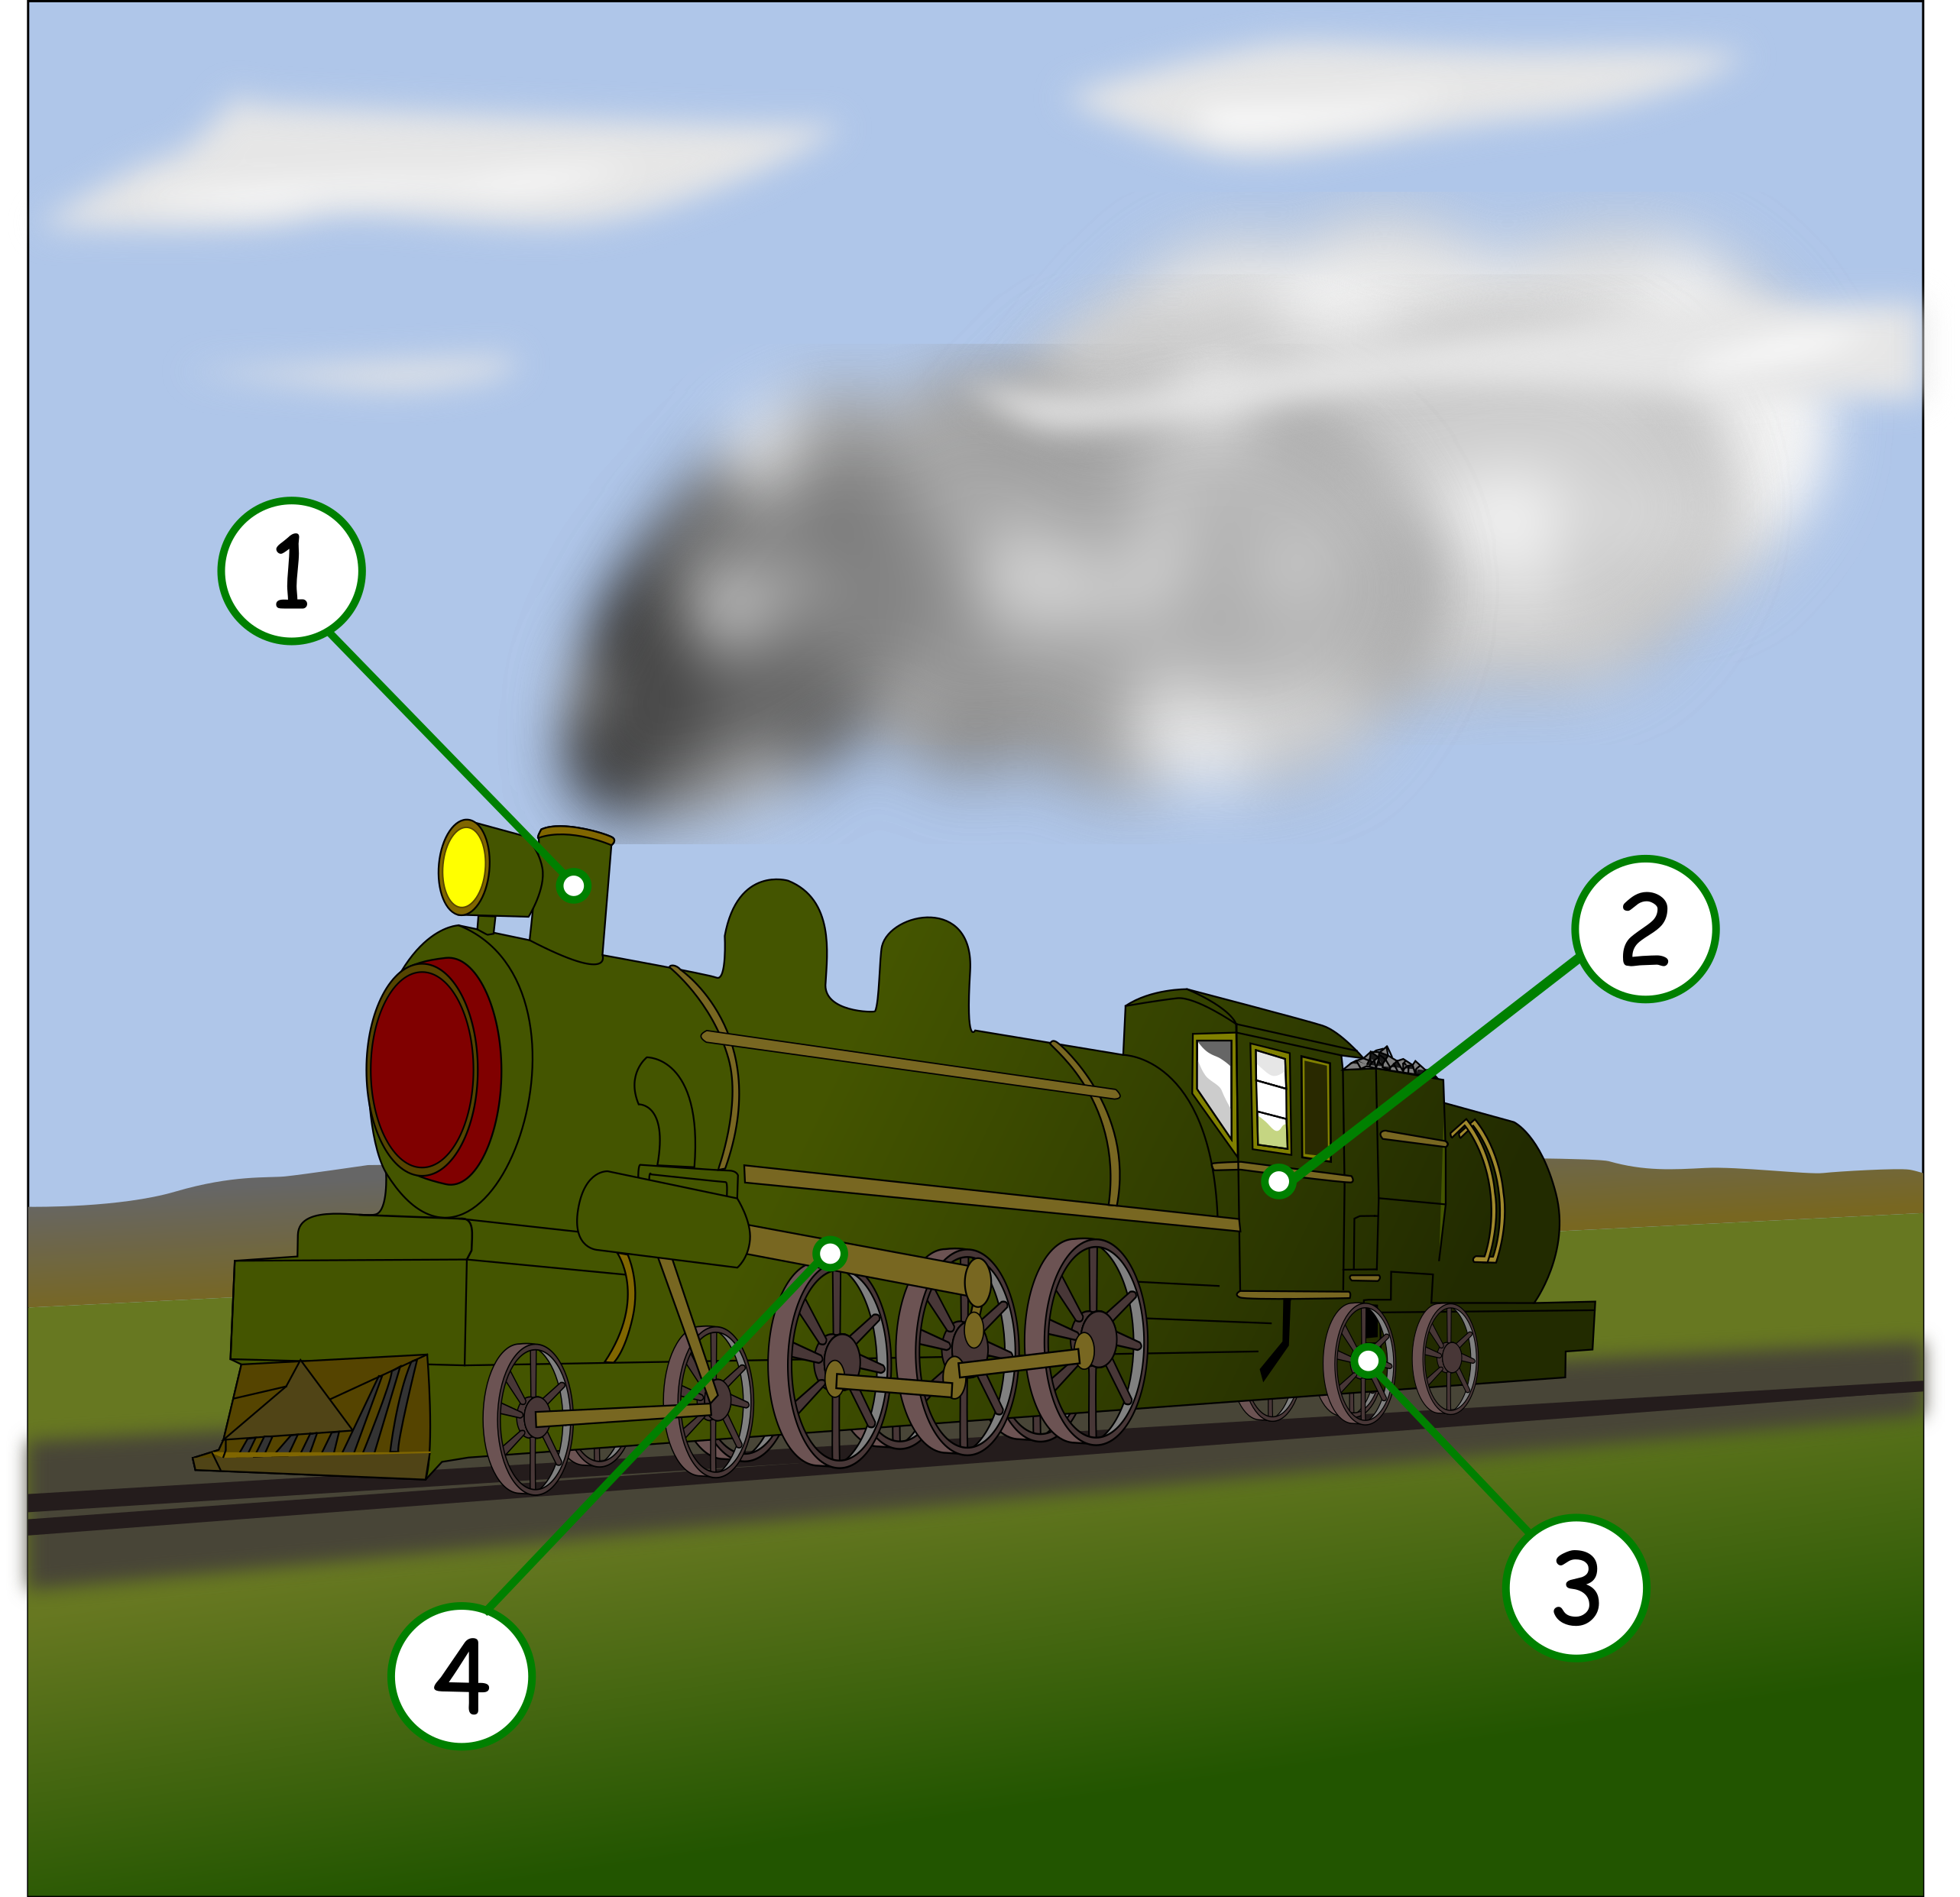 Name parts of a steam train quiz image